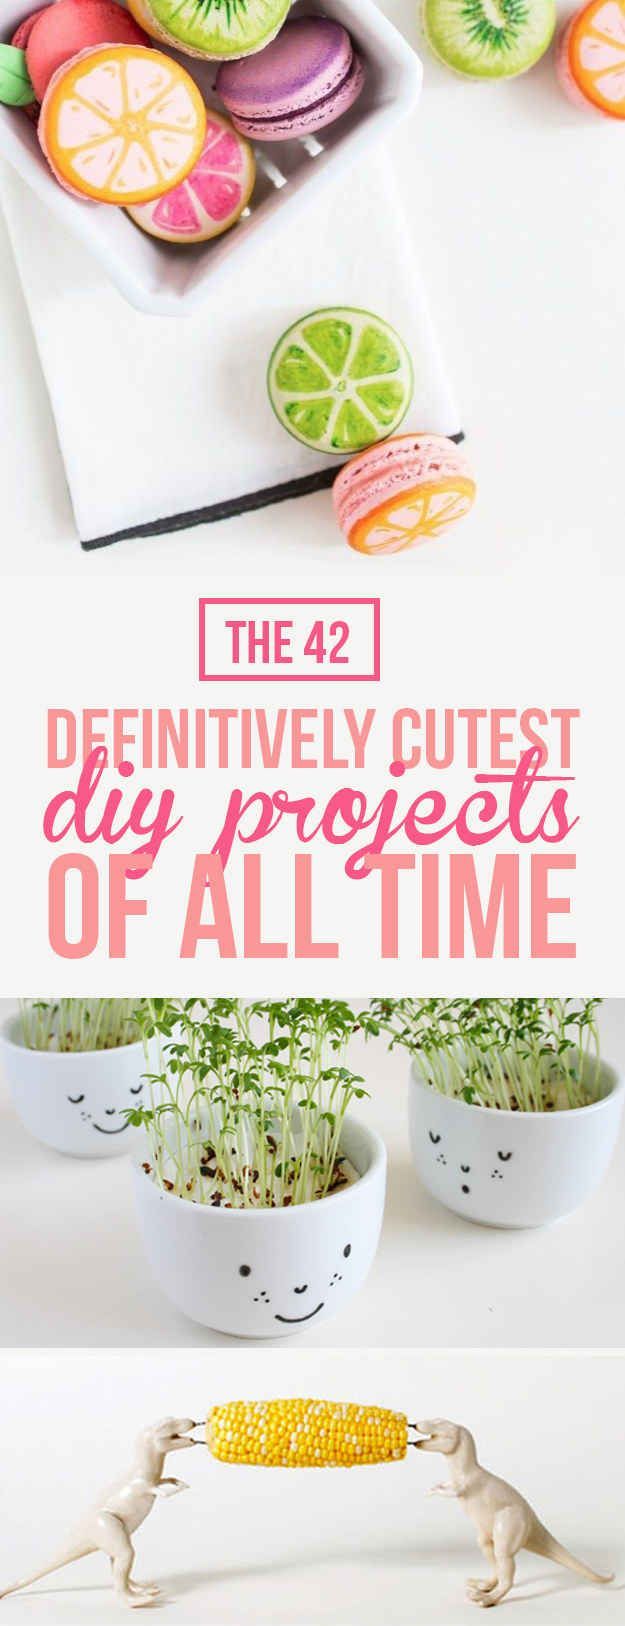 The 42 Definitively Cutest DIY Projects Of All Time (dinosaur corn on the cob holders!)